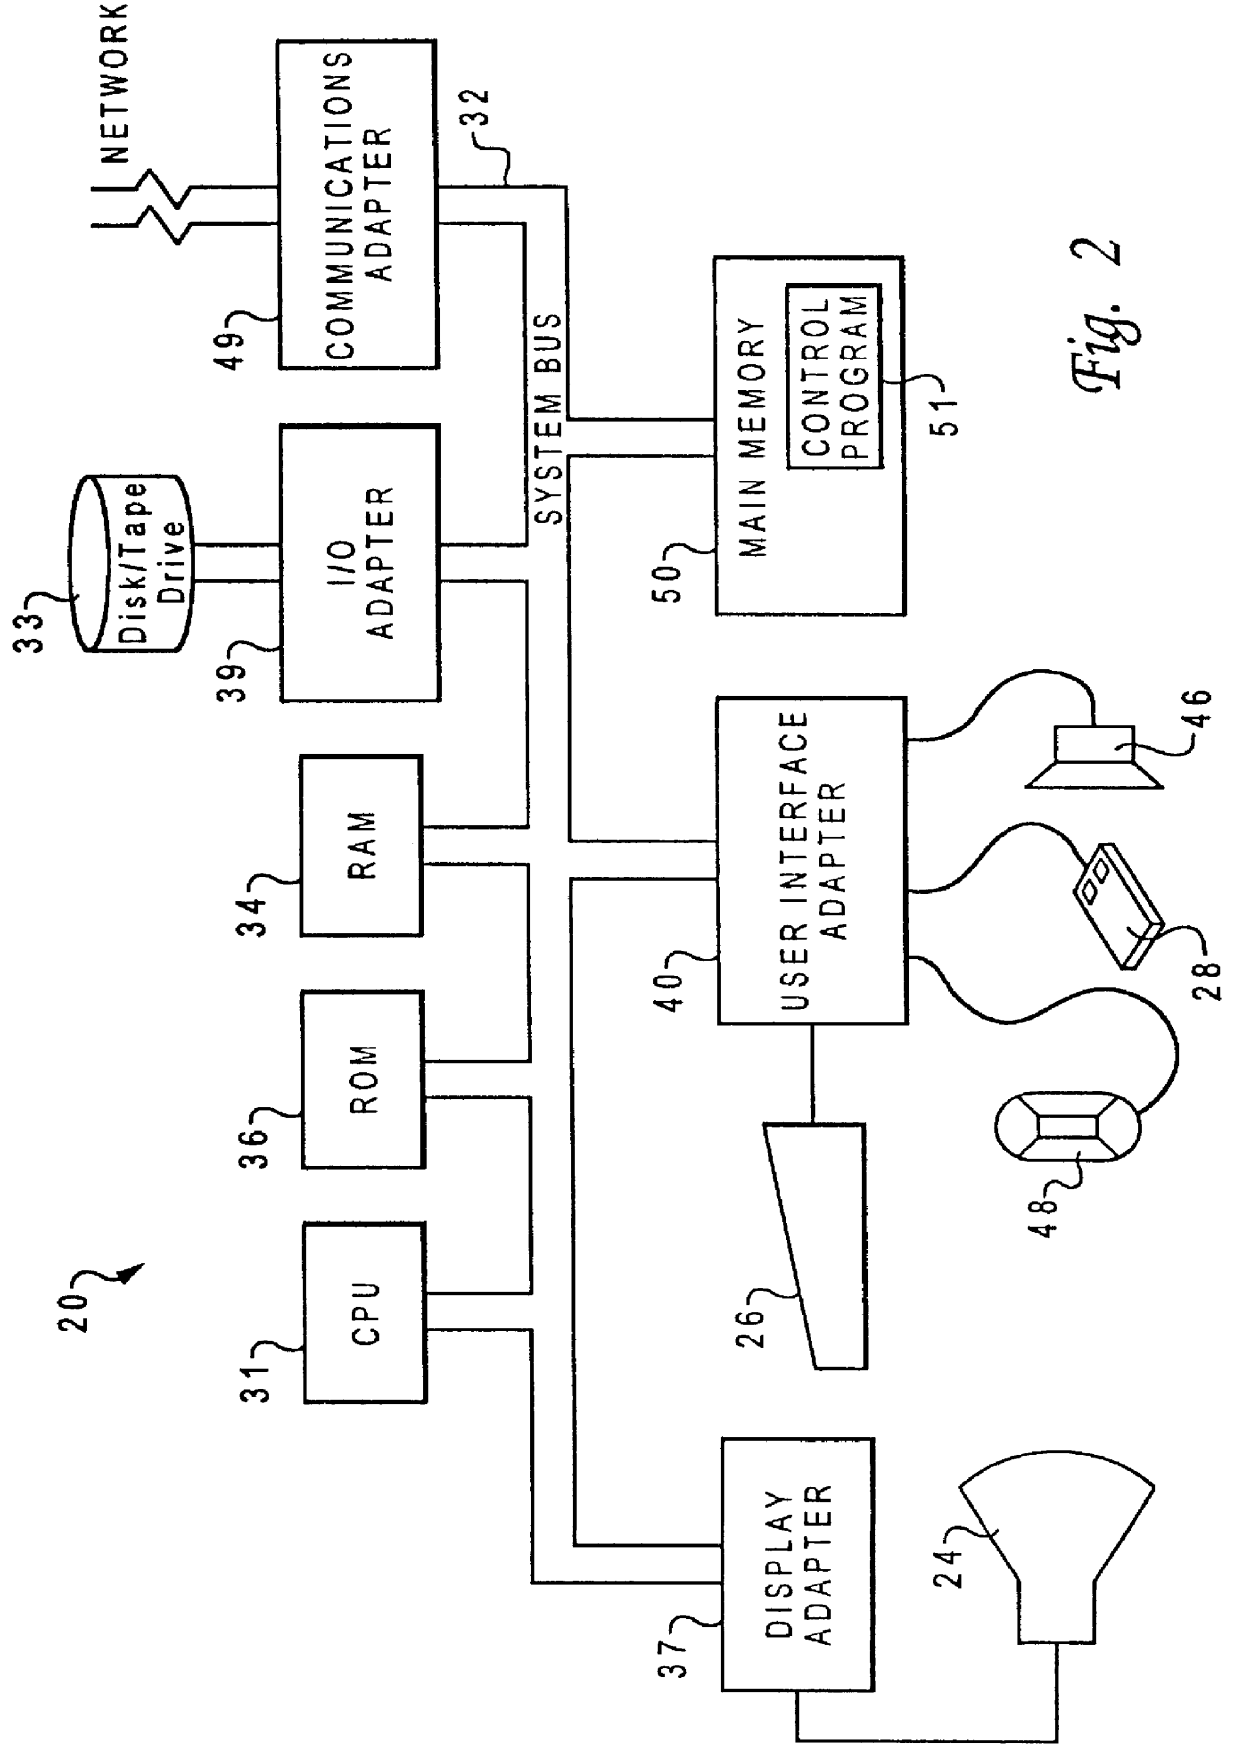 Coupled noise estimation method for on-chip interconnects